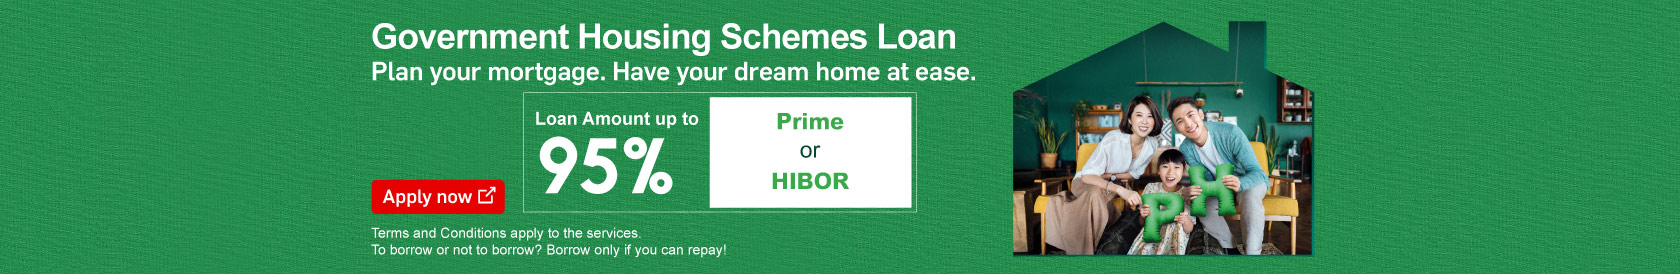 Apply now, Government Housing Schemes Loan. Plan your mortgage. Have you dream home at ease. Up to 95% of loan amount with Prime or HIBOR Plan (Opens in a new window)